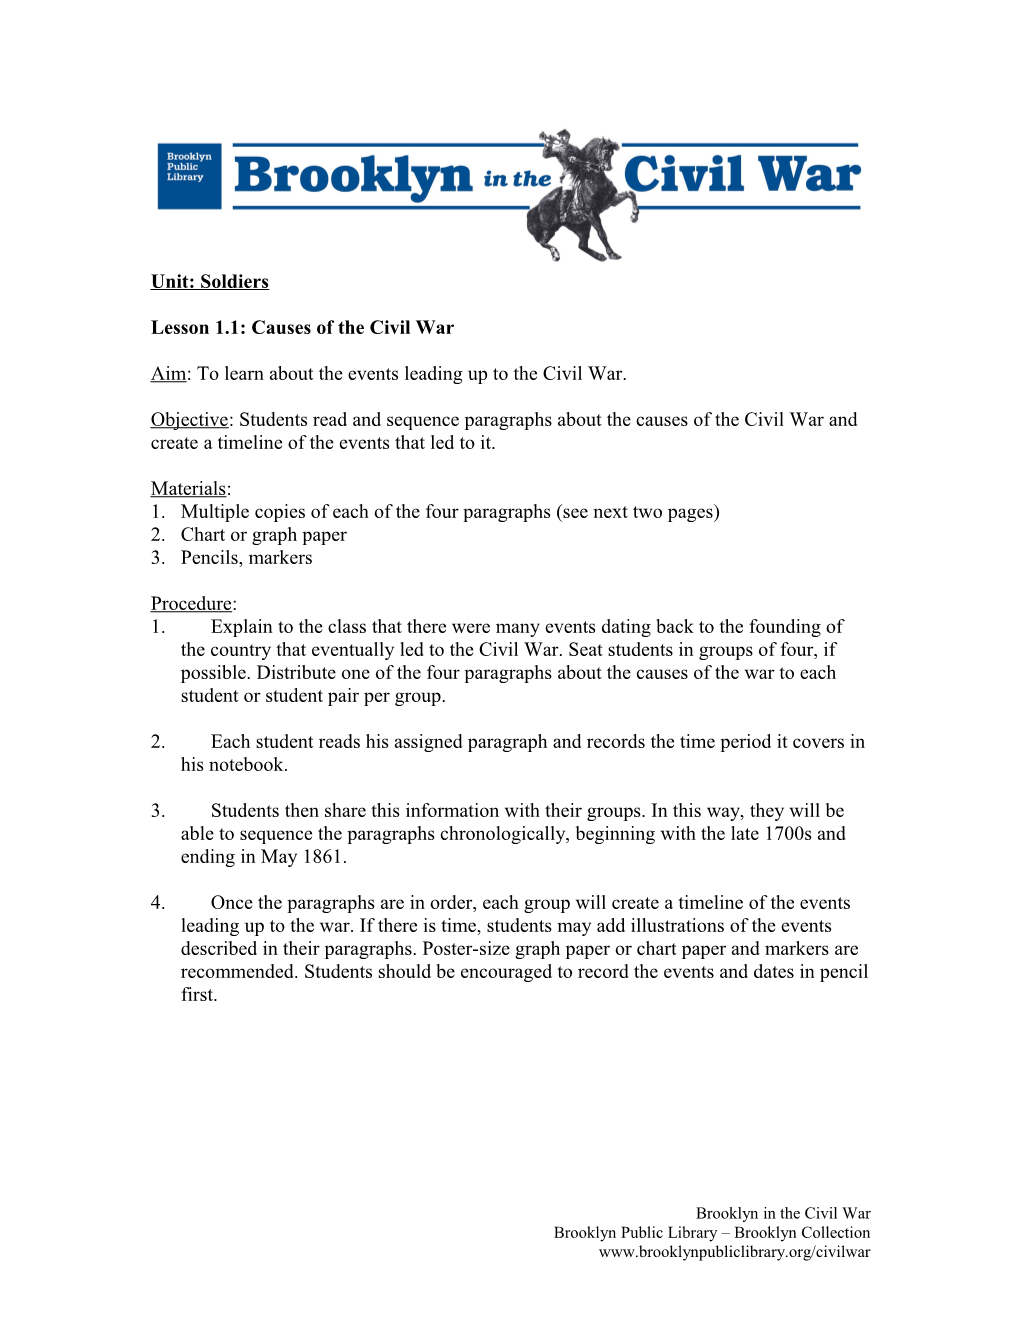 Lesson 1.1: Causes Of The Civil War